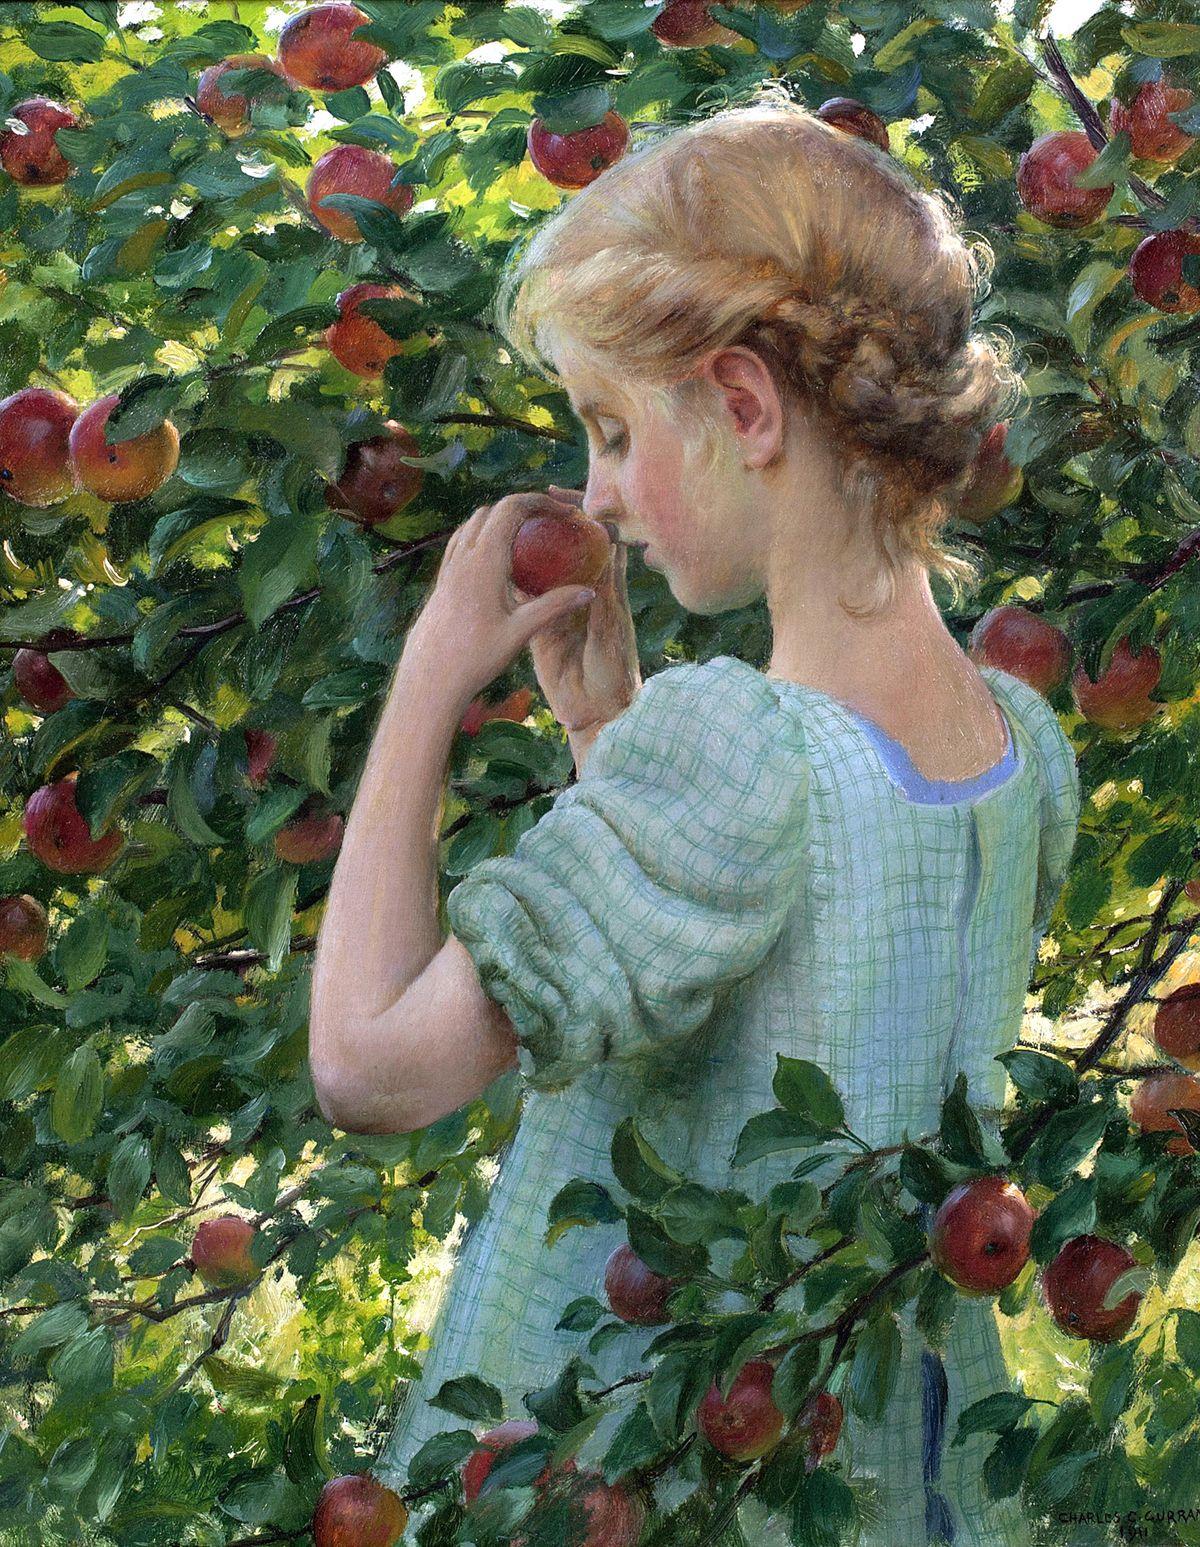 figurative artwork of girl with apple, apple painting by American artist Charles Courtney Curran

CHARLES COURTNEY CURRAN (1861 - 1942)
Apple Perfume, 1911
Oil on canvas
22 x 18 inches
Signed and dated "CHARLES C. CURRAN·/1911" lower right
Titled,